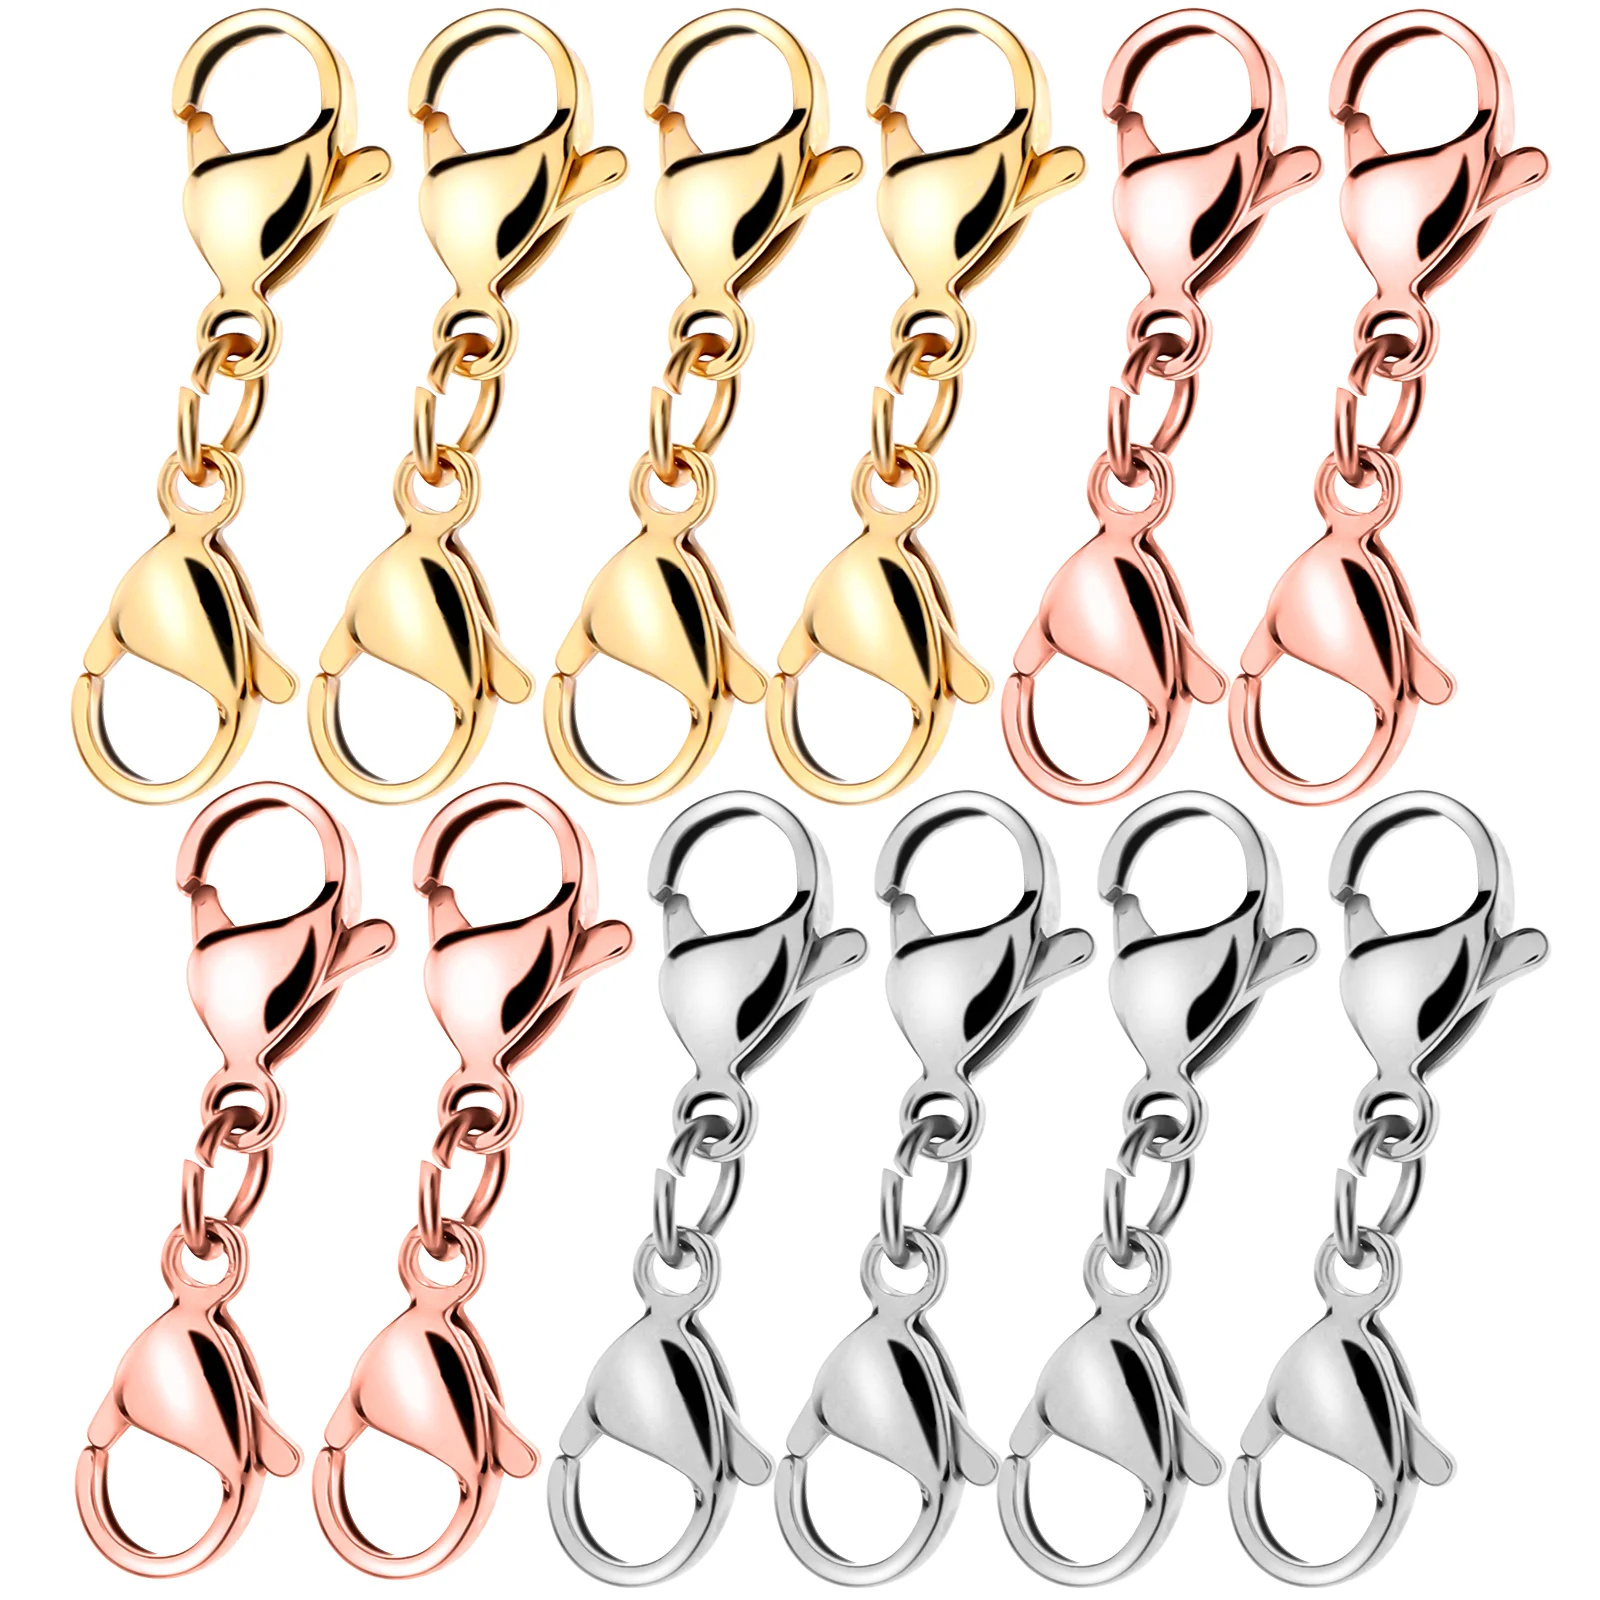 

12 Pcs Lobster Clasp Mini Accessories Connector Clasps Bracelet Jewellery Fasteners Necklace Layering Metal Jewelry Making